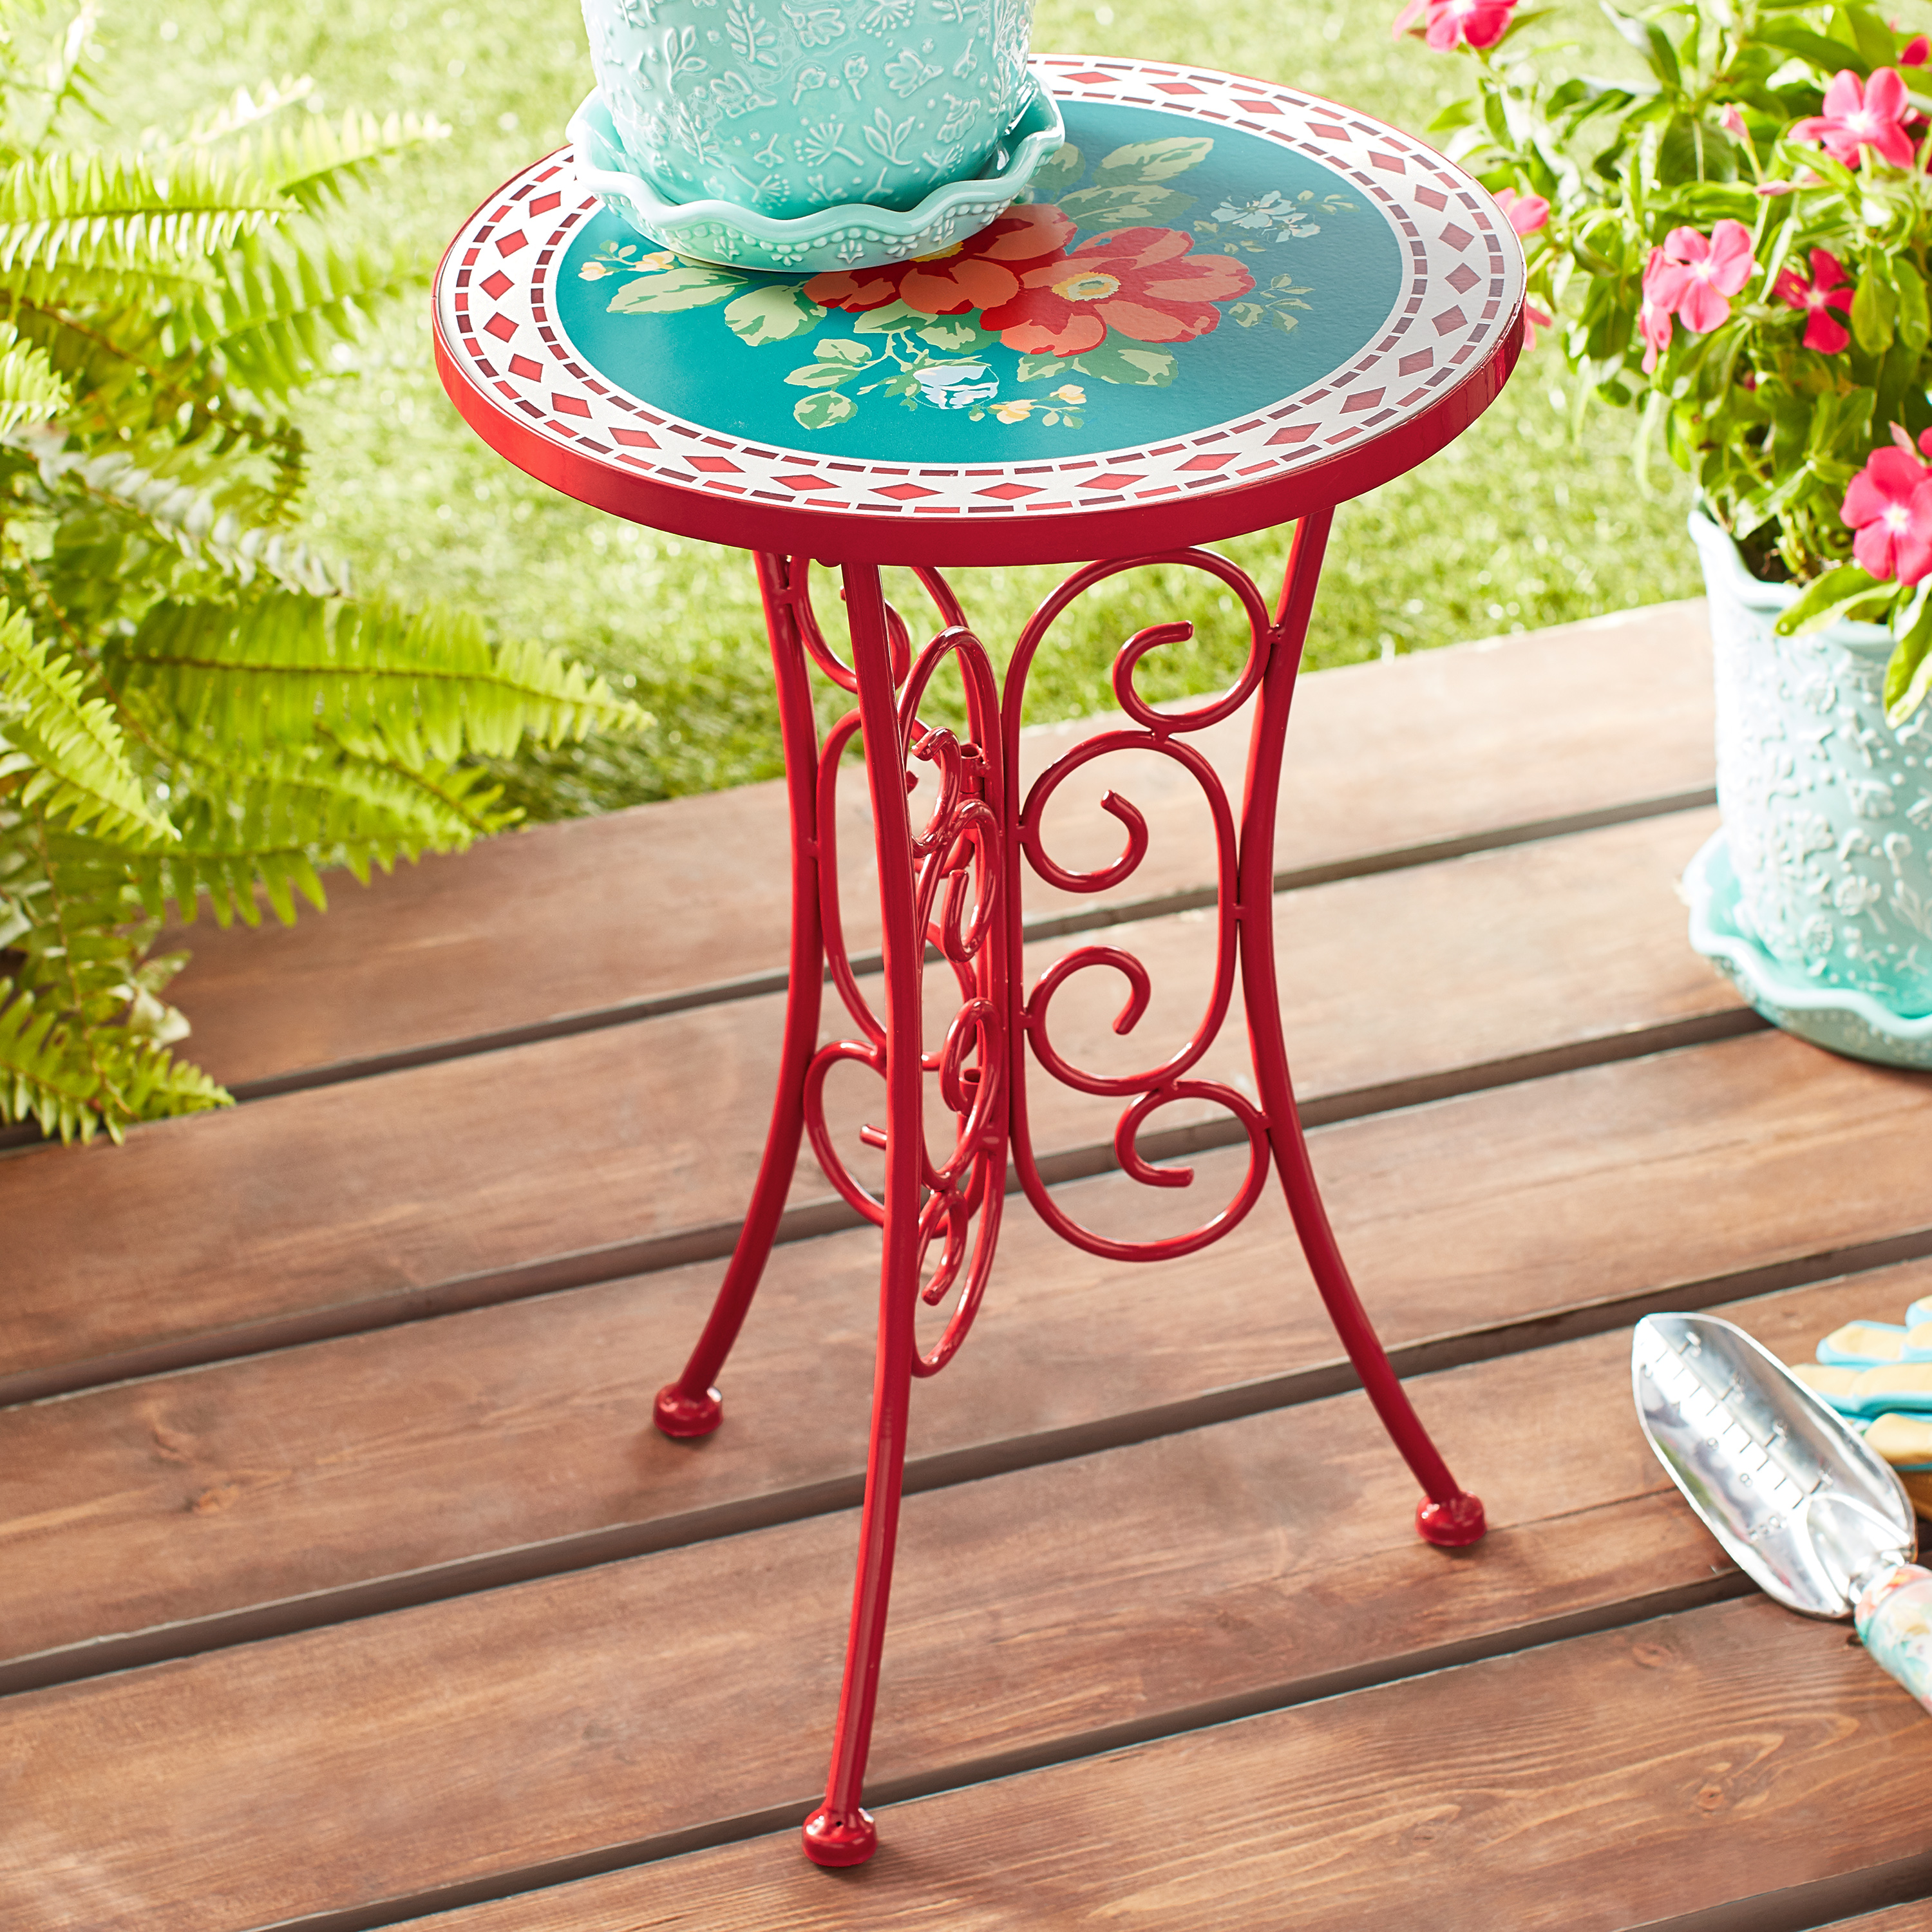 The Pioneer Woman Knockdown Tile and Iron Round Vintage Plant Stand - image 3 of 9